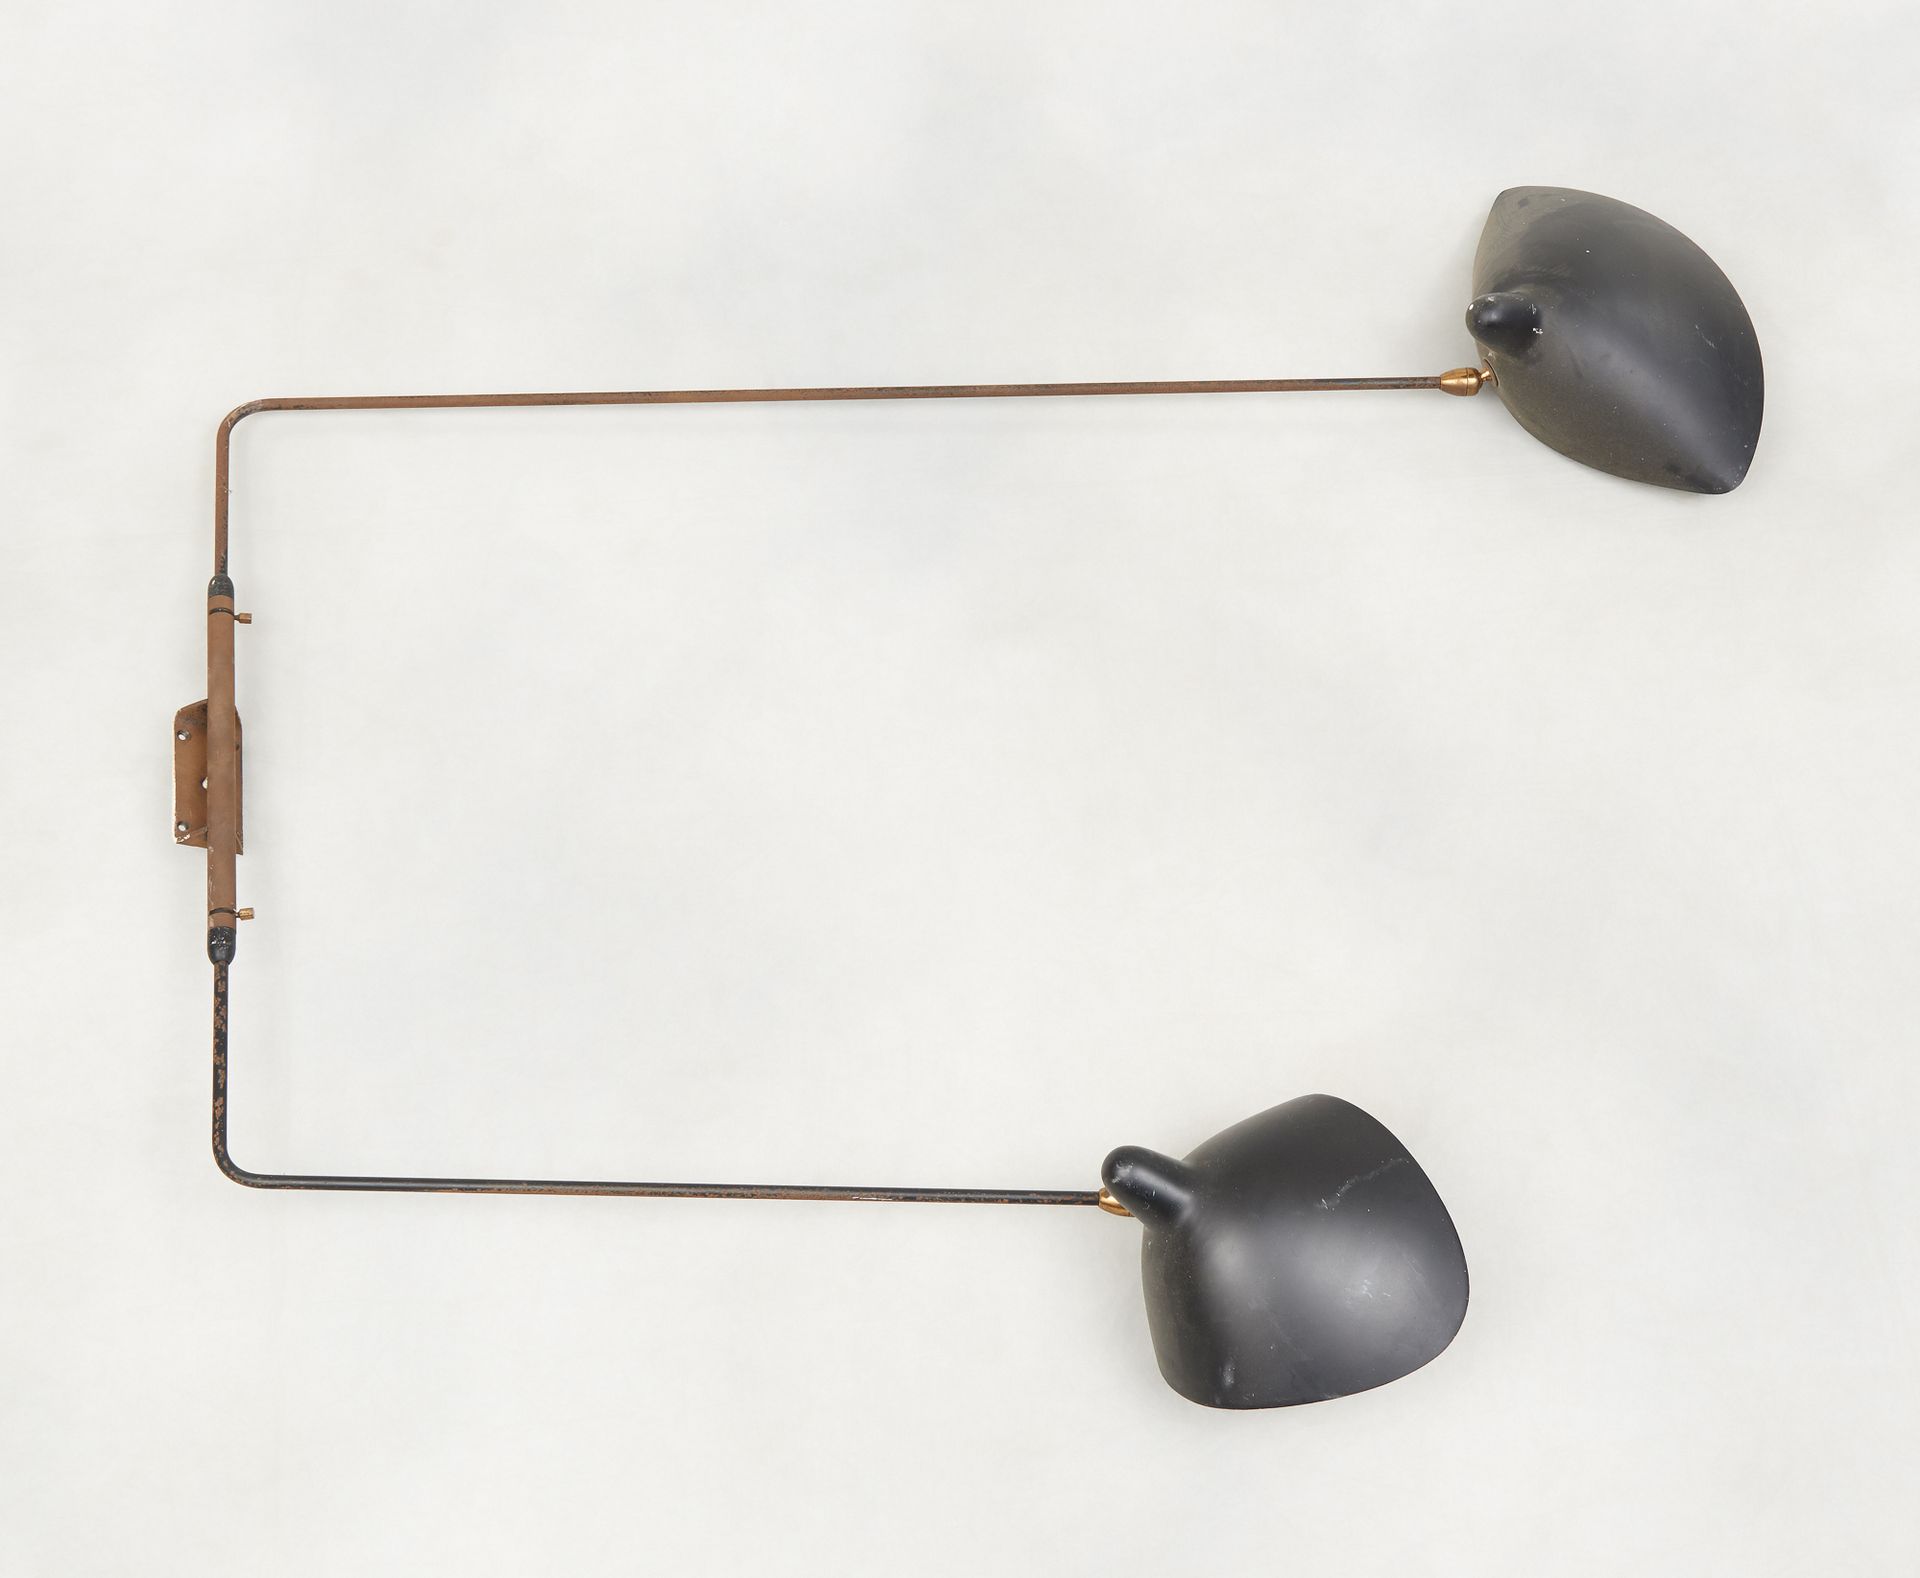 Design Serge Mouille. Luminaire: Two-arm wall light (1954) in lacquered steel.

&hellip;